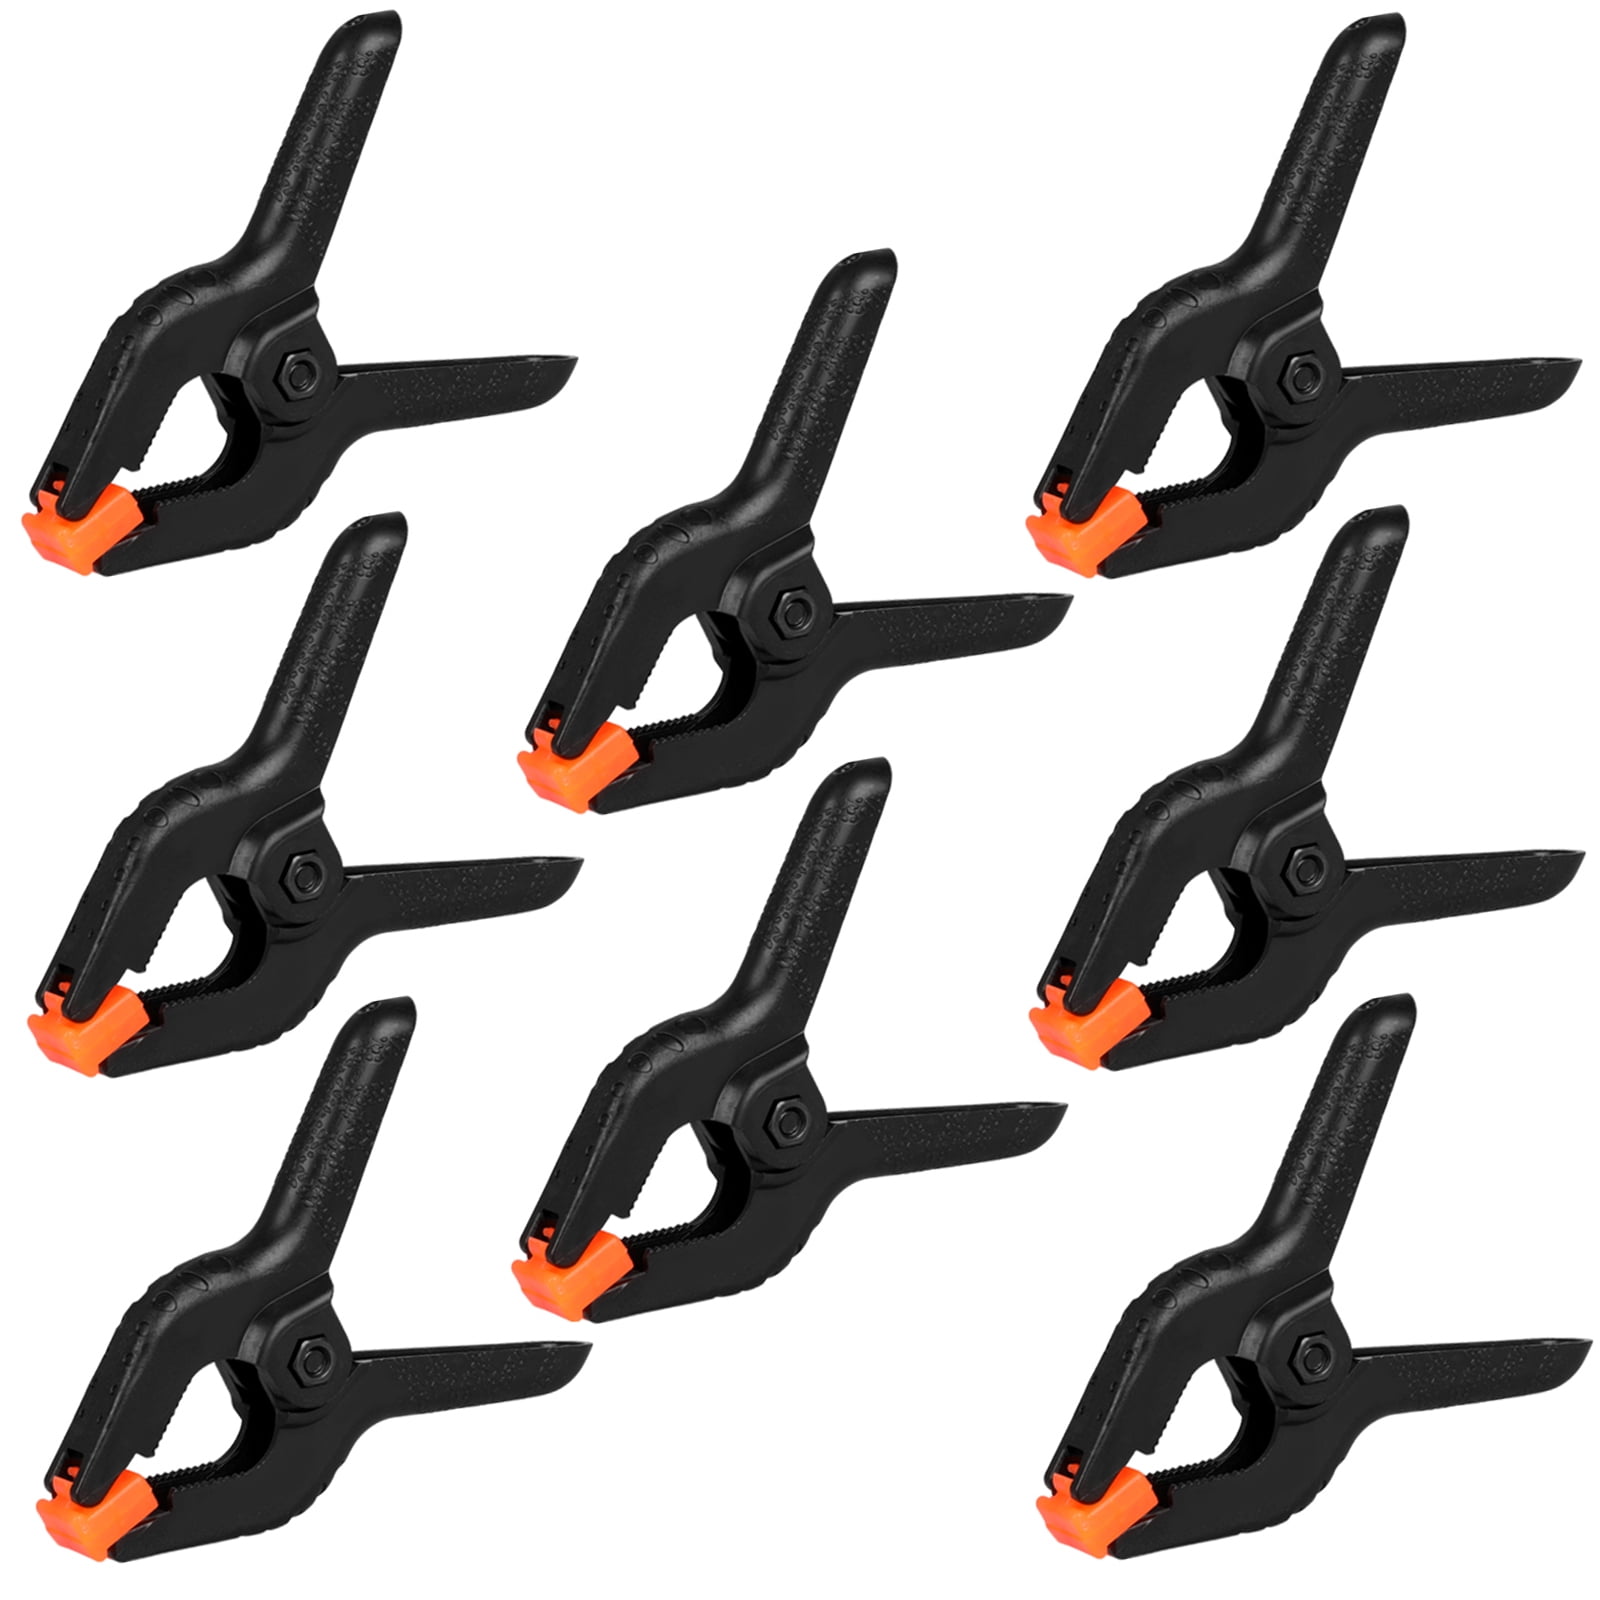 Spring Clamps, 6 Inch Plastic Clamps for Woodworking, Large Heavy Duty  Clamps with 3 inch Jaw Opening, Plastic Clips Clamps for Crafts, Backdrop,  DIY, Gluing, 2Pack 